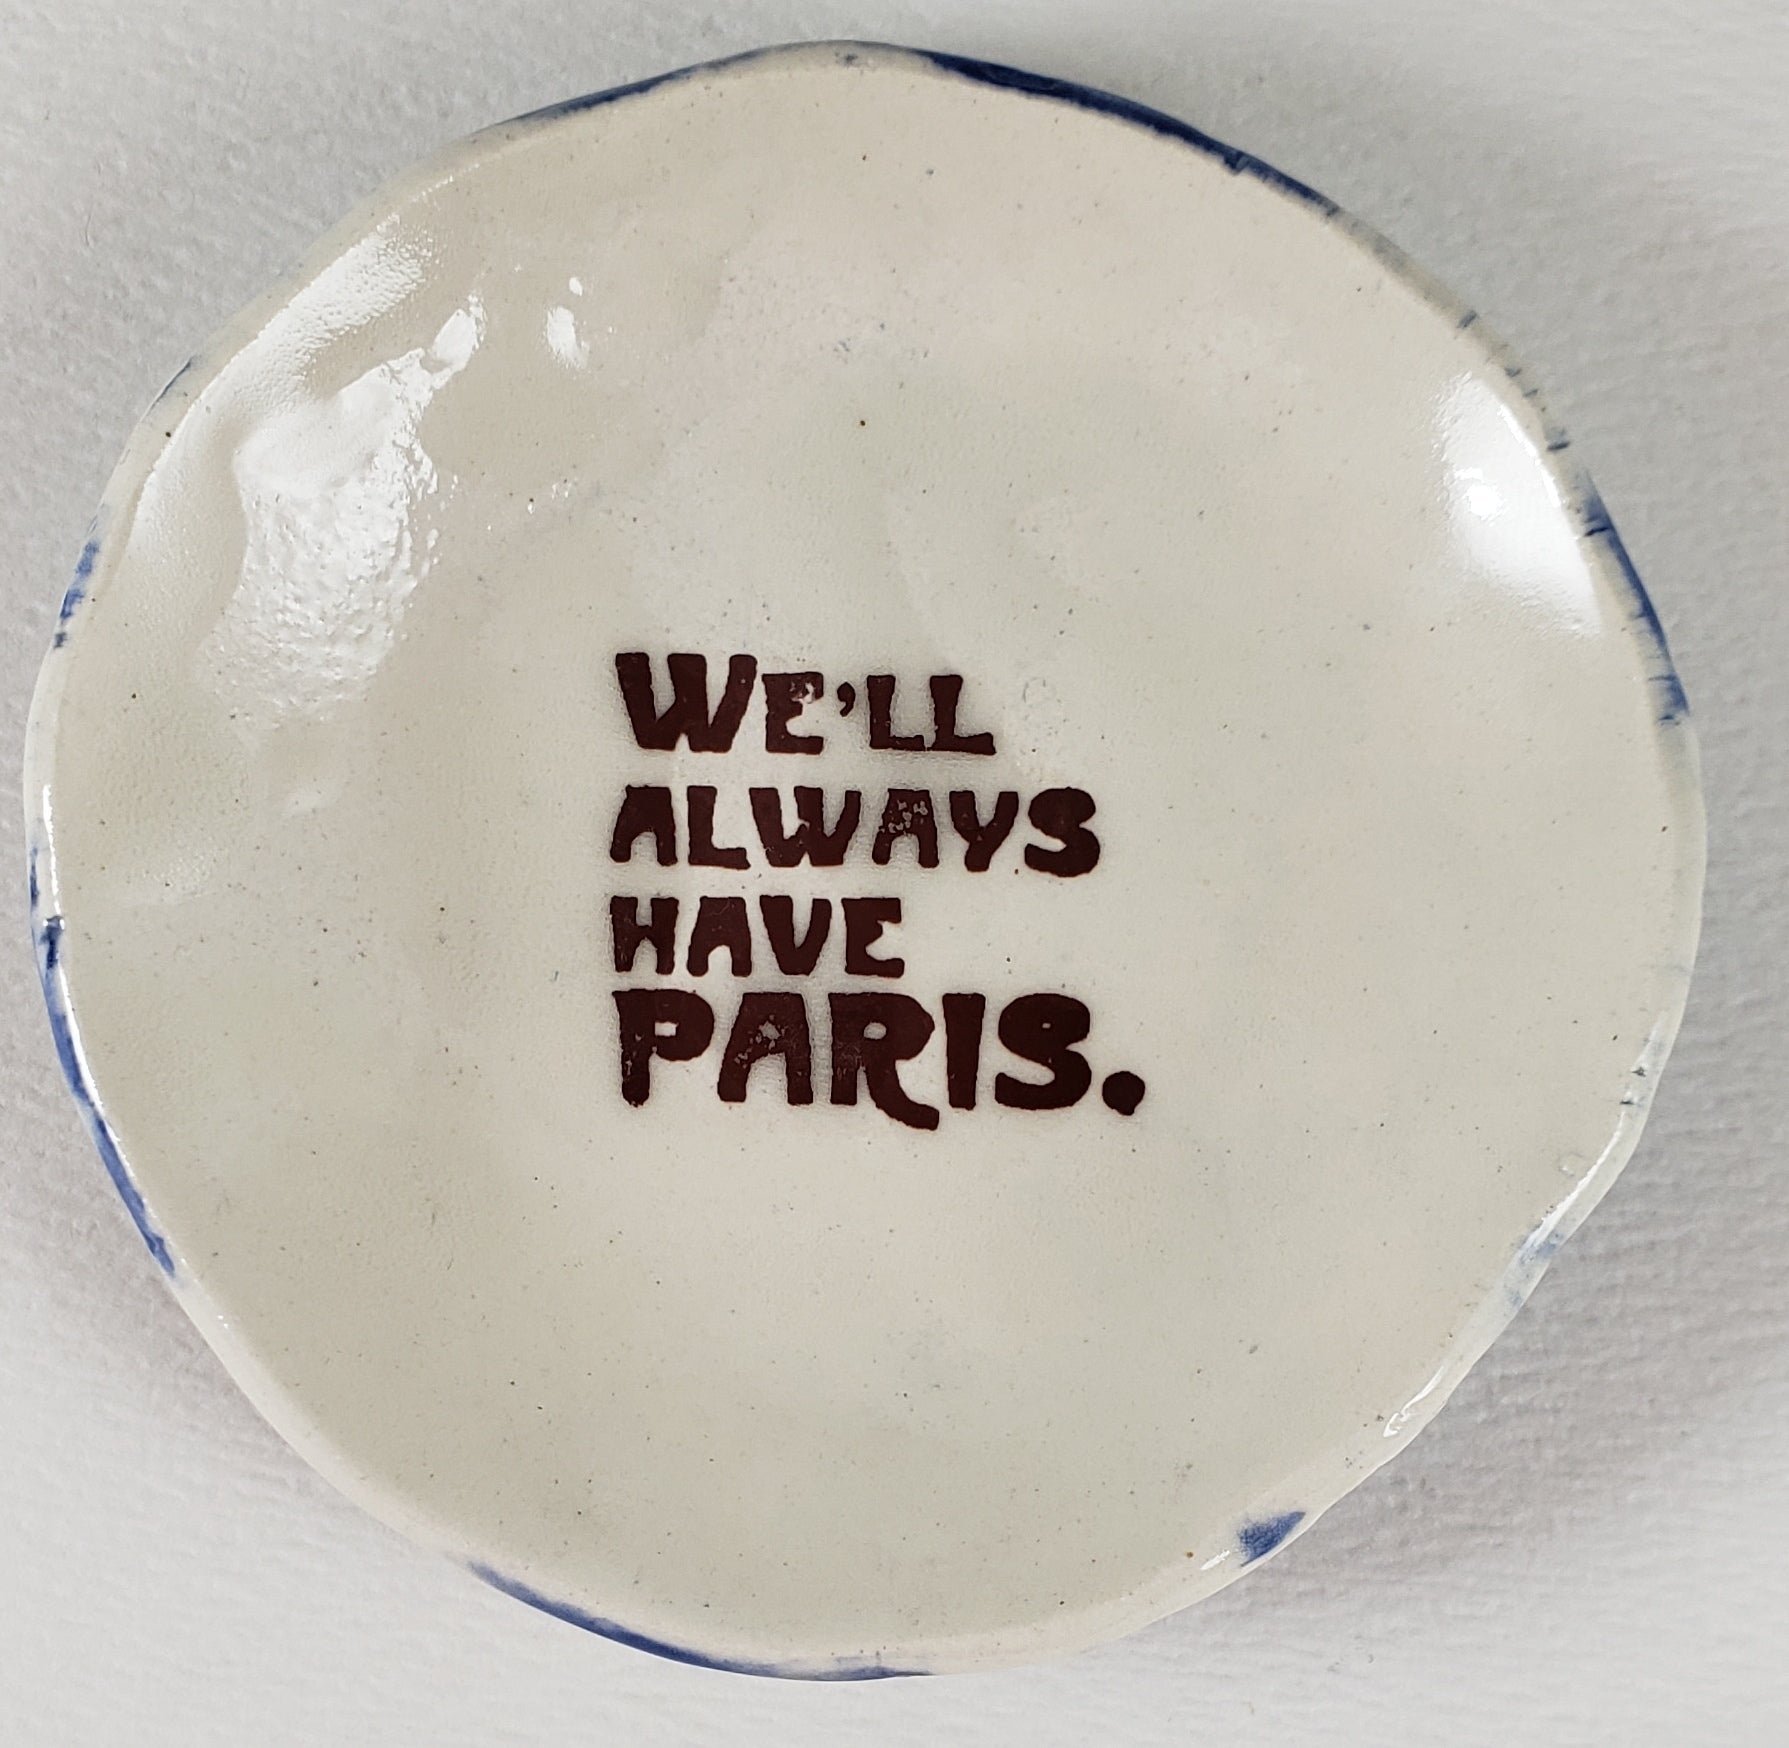 Tiny Plate with "We'll Always Have Paris"